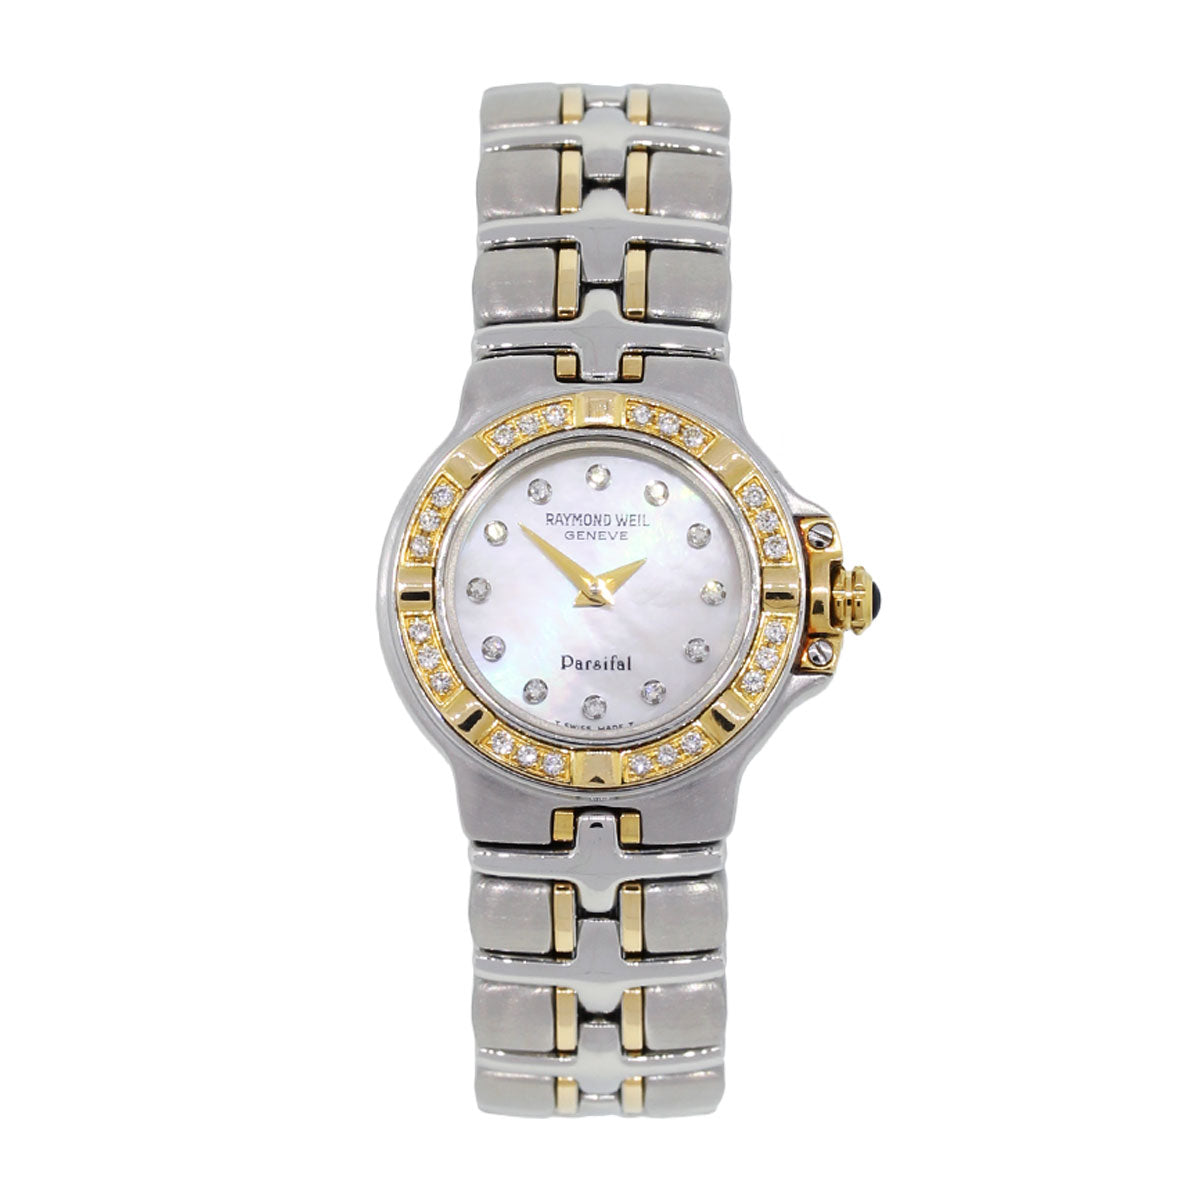 Ladies Raymond Weil Parsifal Two Tone Watch with Mother of Pearl Diamond Dial and Diamond Bezel. (Pre-Owned)